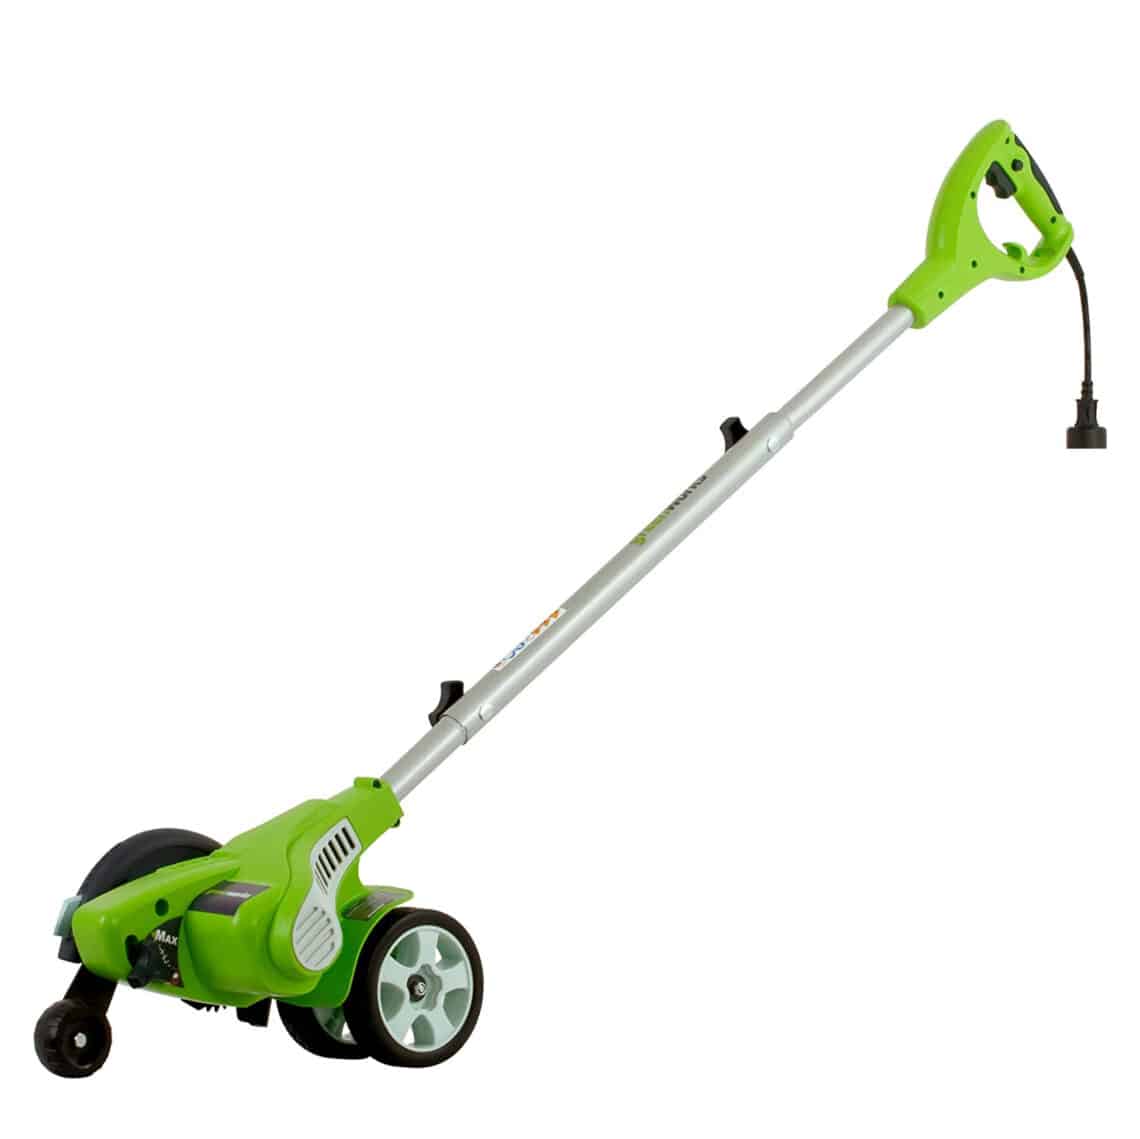 Top 10 Best Electric Lawn Edgers in 2020 Reviews | Buyer's Guide